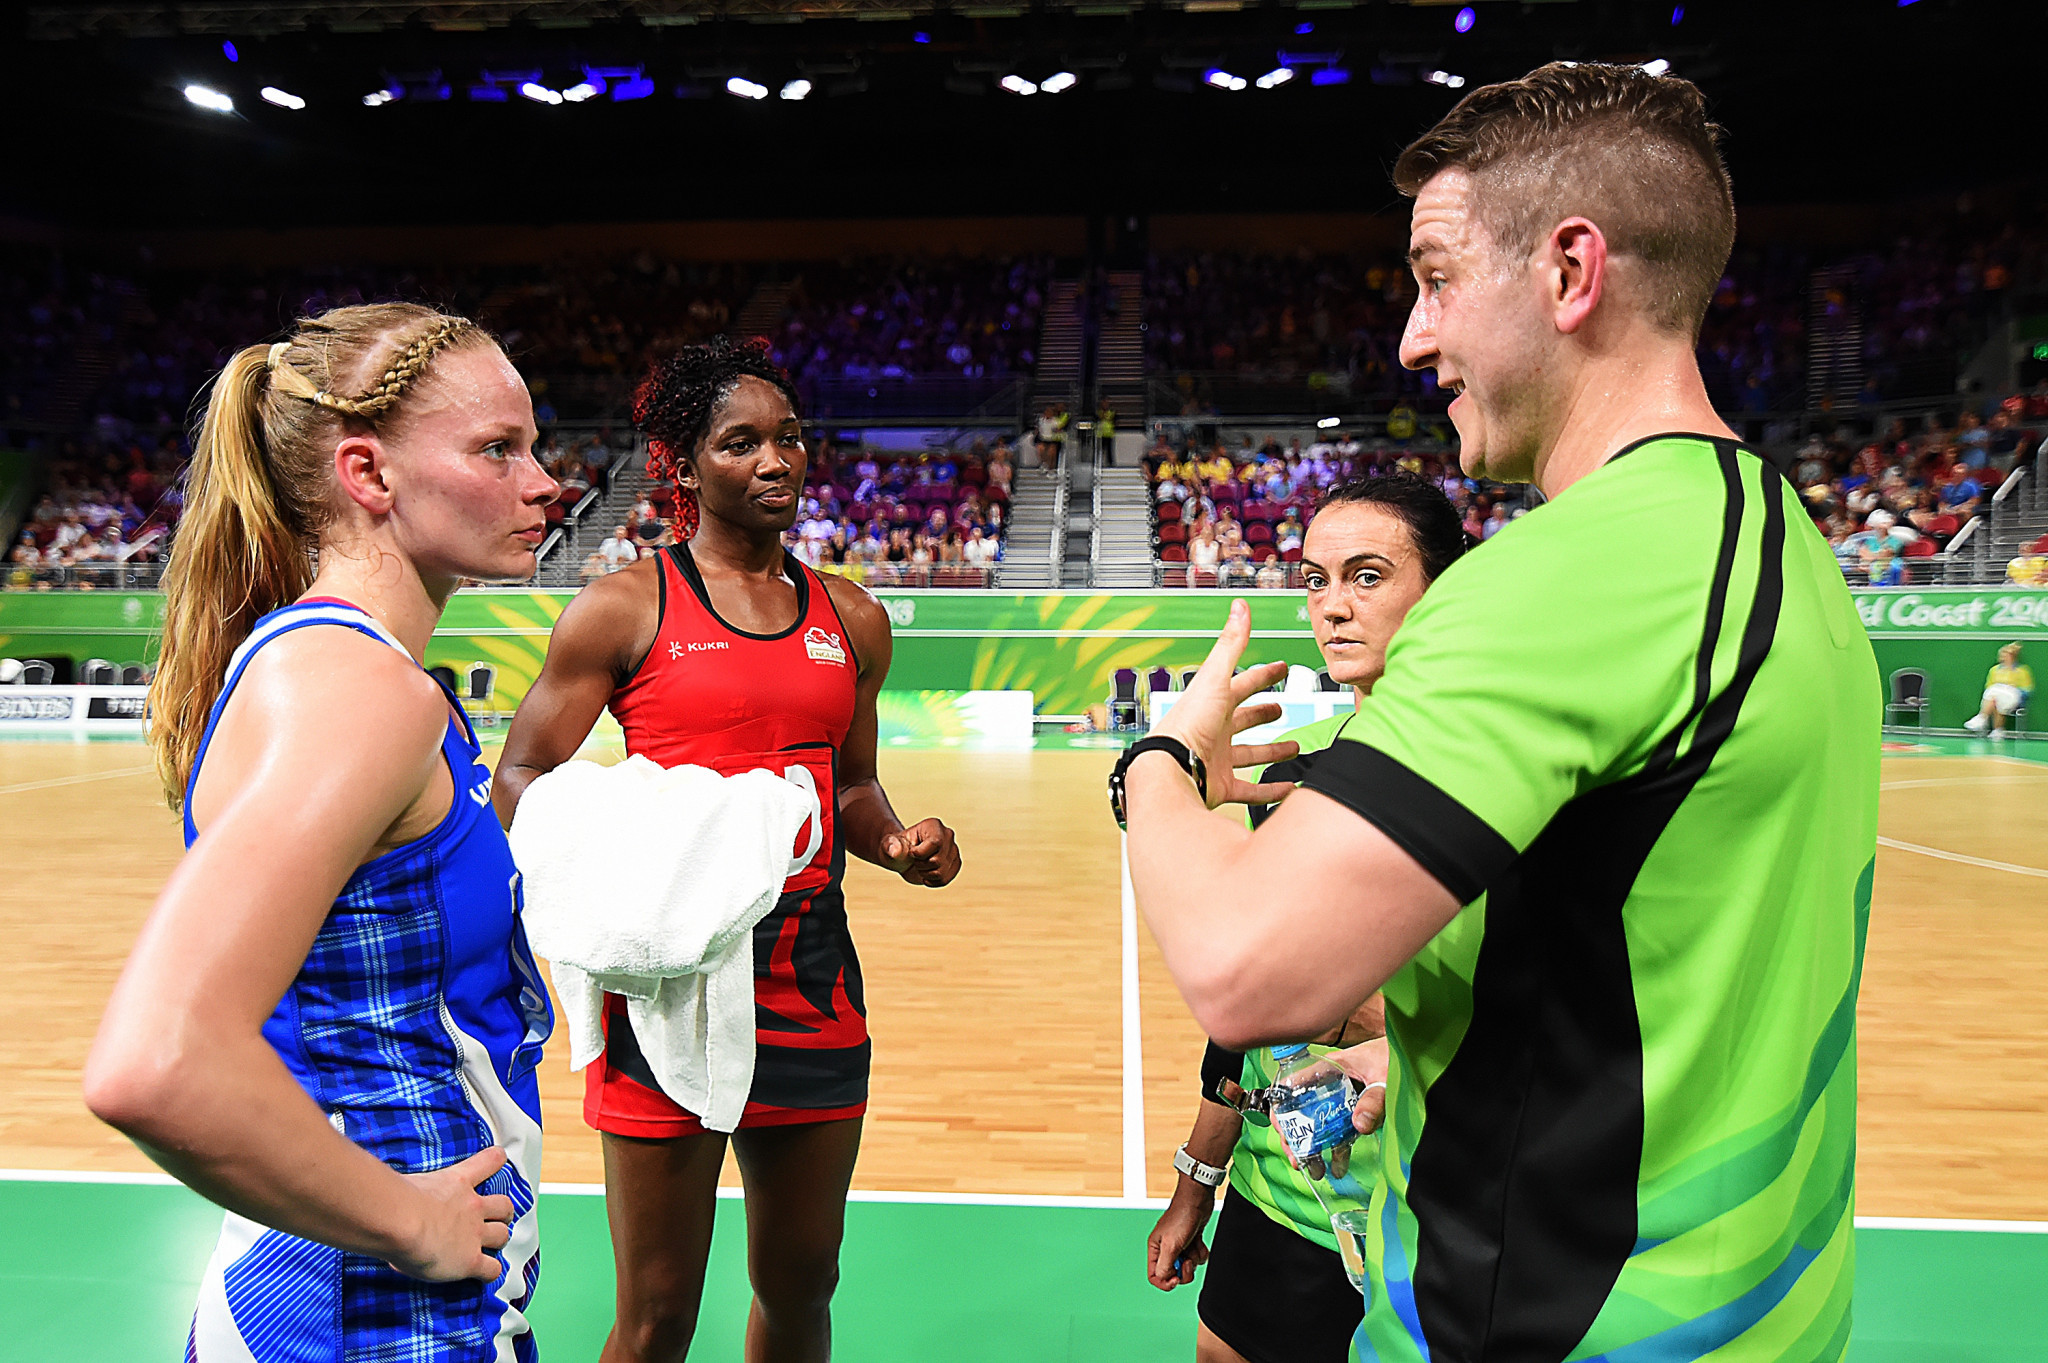 The International Netball Federation is working to improve its officiating ©INF